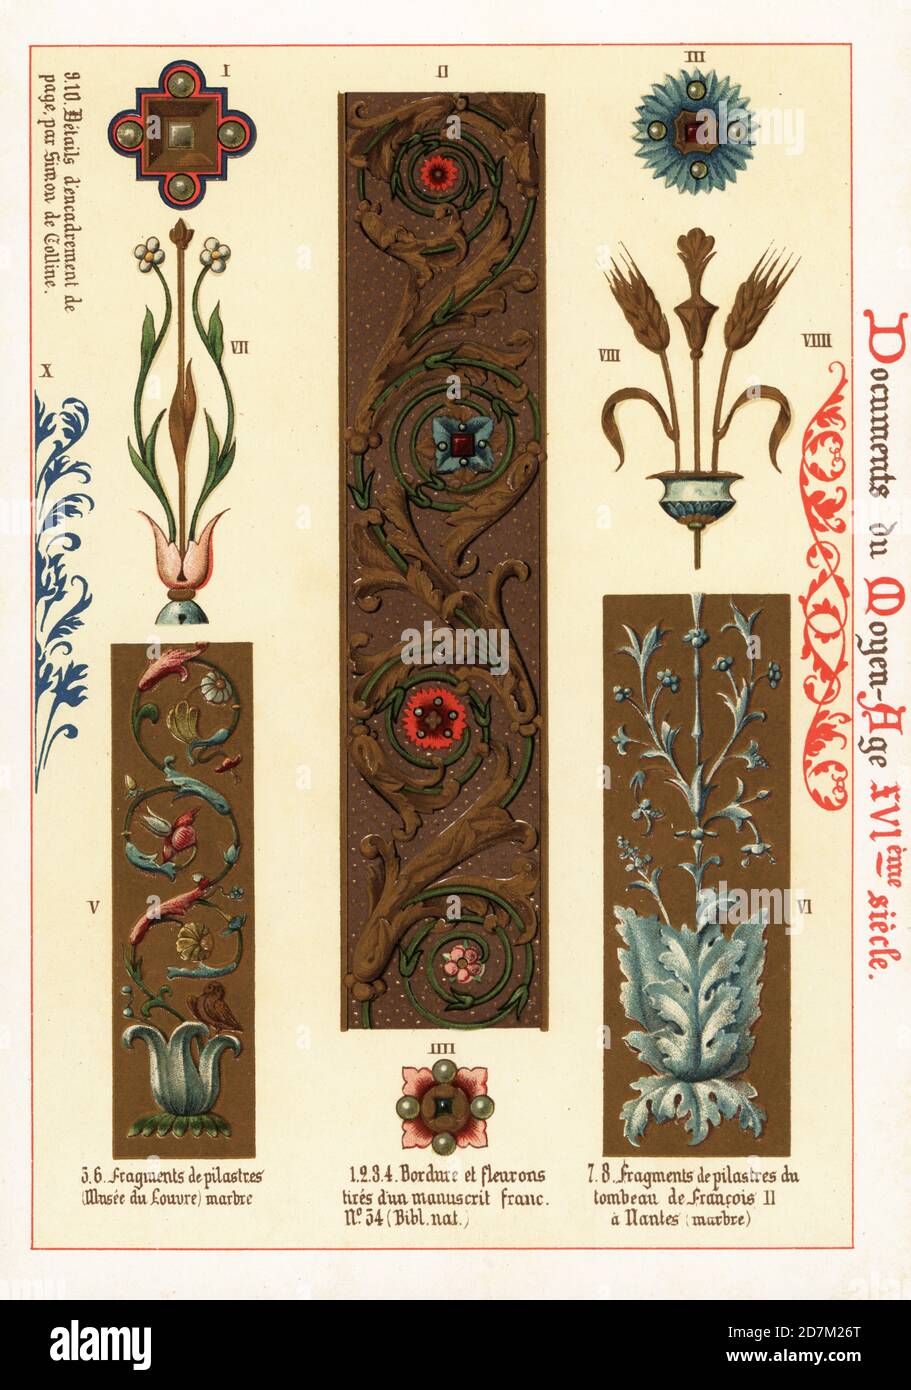 Design elements from manuscripts and painted marble the 16th century. 1-4 Border and fleurons from manuscript, 5-8 fragments of marble pilaster. Taken from manuscript Franc. 54, Bib. Nat, the Louvre Museum and the tomb of Francis II, Duke of Brittany, at Nantes. Chromolithograph designed and lithographed by Ernst Guillot from Elements d'Ornementation du XVIe Siecle, Elements of Ornament of the 16th century, Renouard, Paris, 1890. Stock Photo